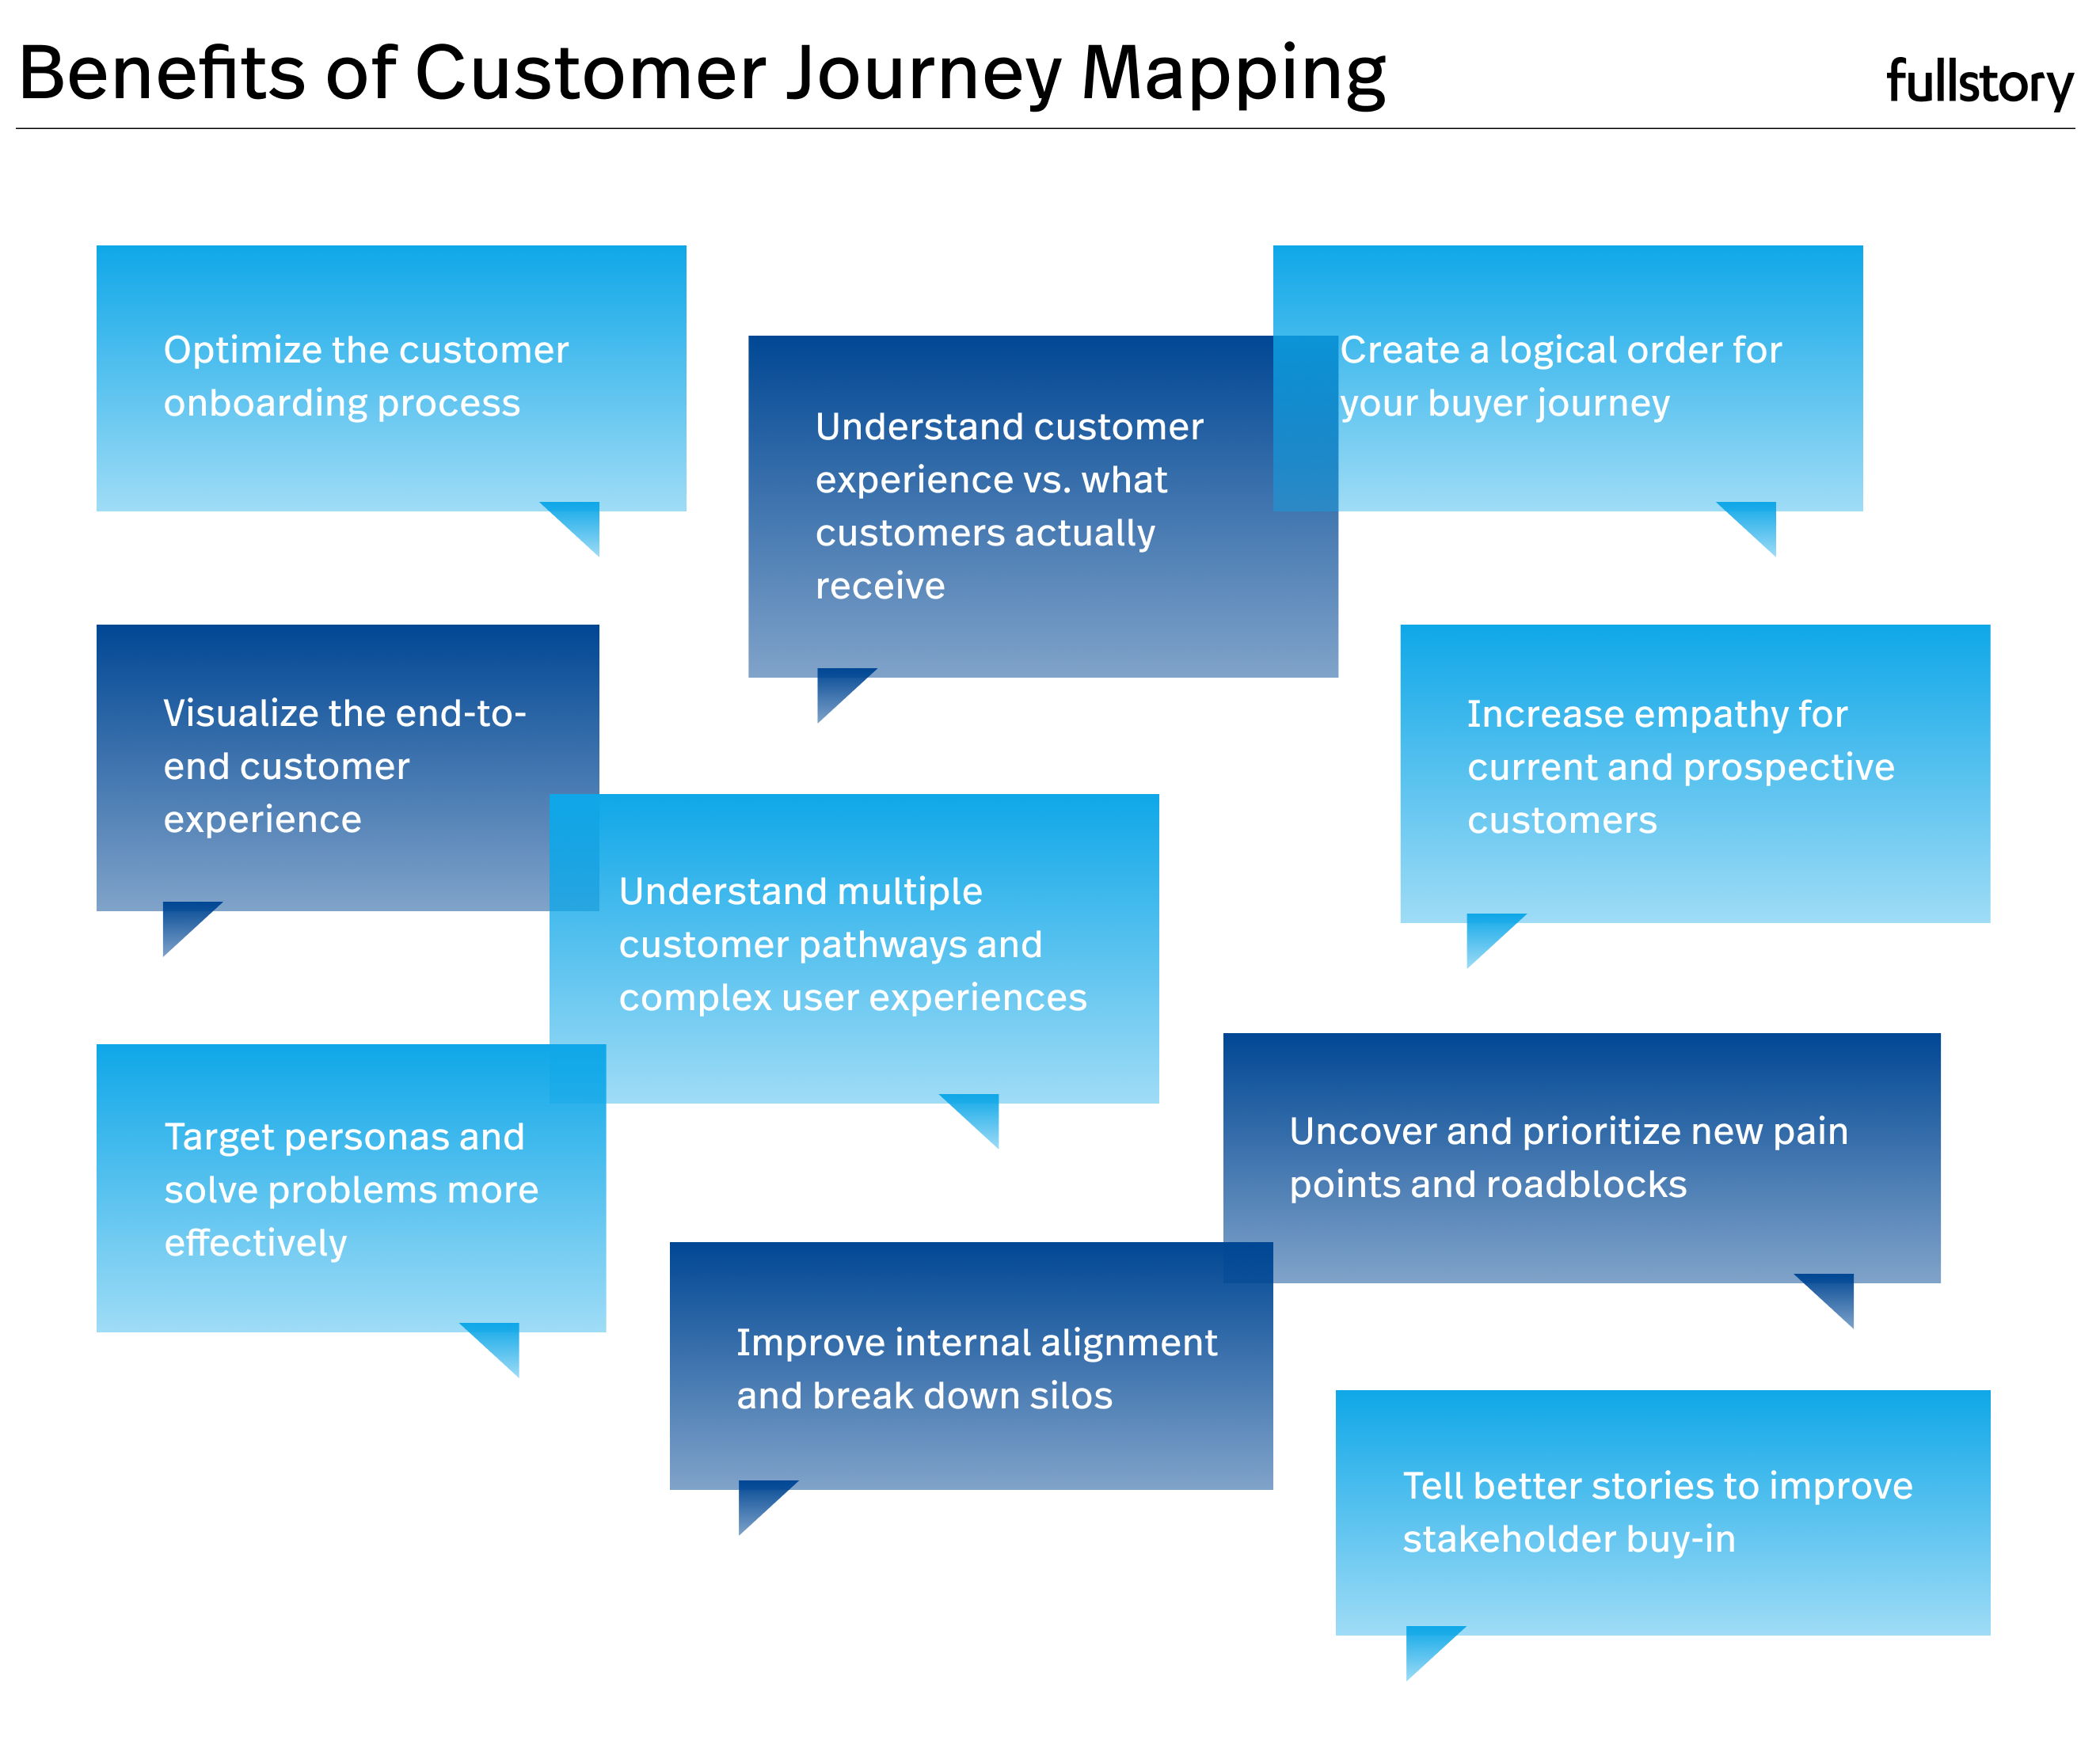 Benefits of customer journey mapping: optimize the customer onboarding process, understand customer experience vs. what customers actually receive, create a logical order for your buyer jounrye, visualize the end-to-end customer experience, understand multiple customer pathways and complex user experiences, increase empathy for current and prospective customers, target personas and solve problems more effectively, improve internal alignment and break down silos, uncover and prioritize new pain points and roadblocks, tell better stories to improve stakeholder buy-in